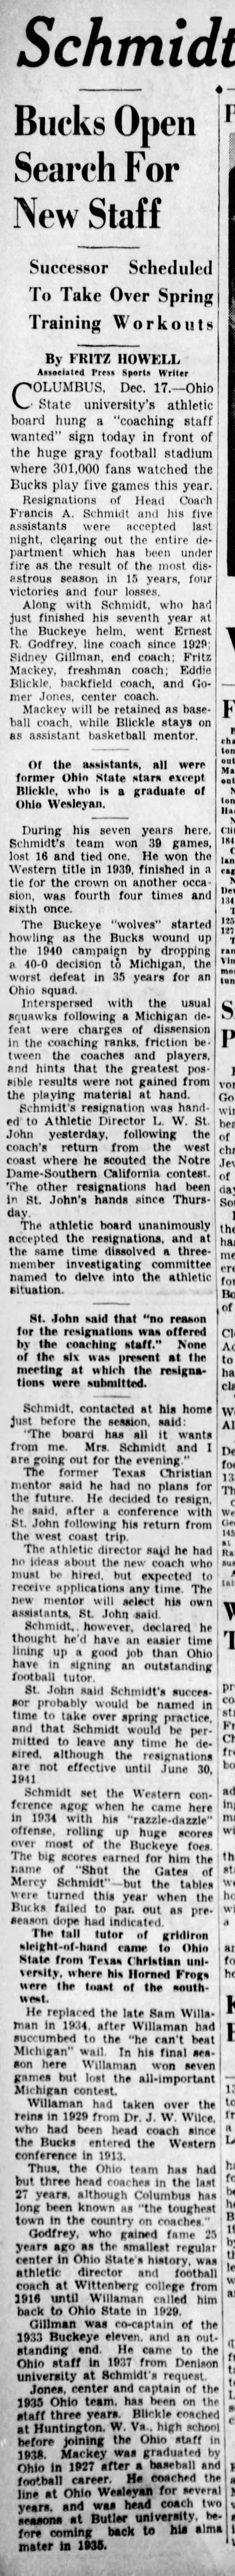 1940 Francis Schmidt resigns at Ohio State